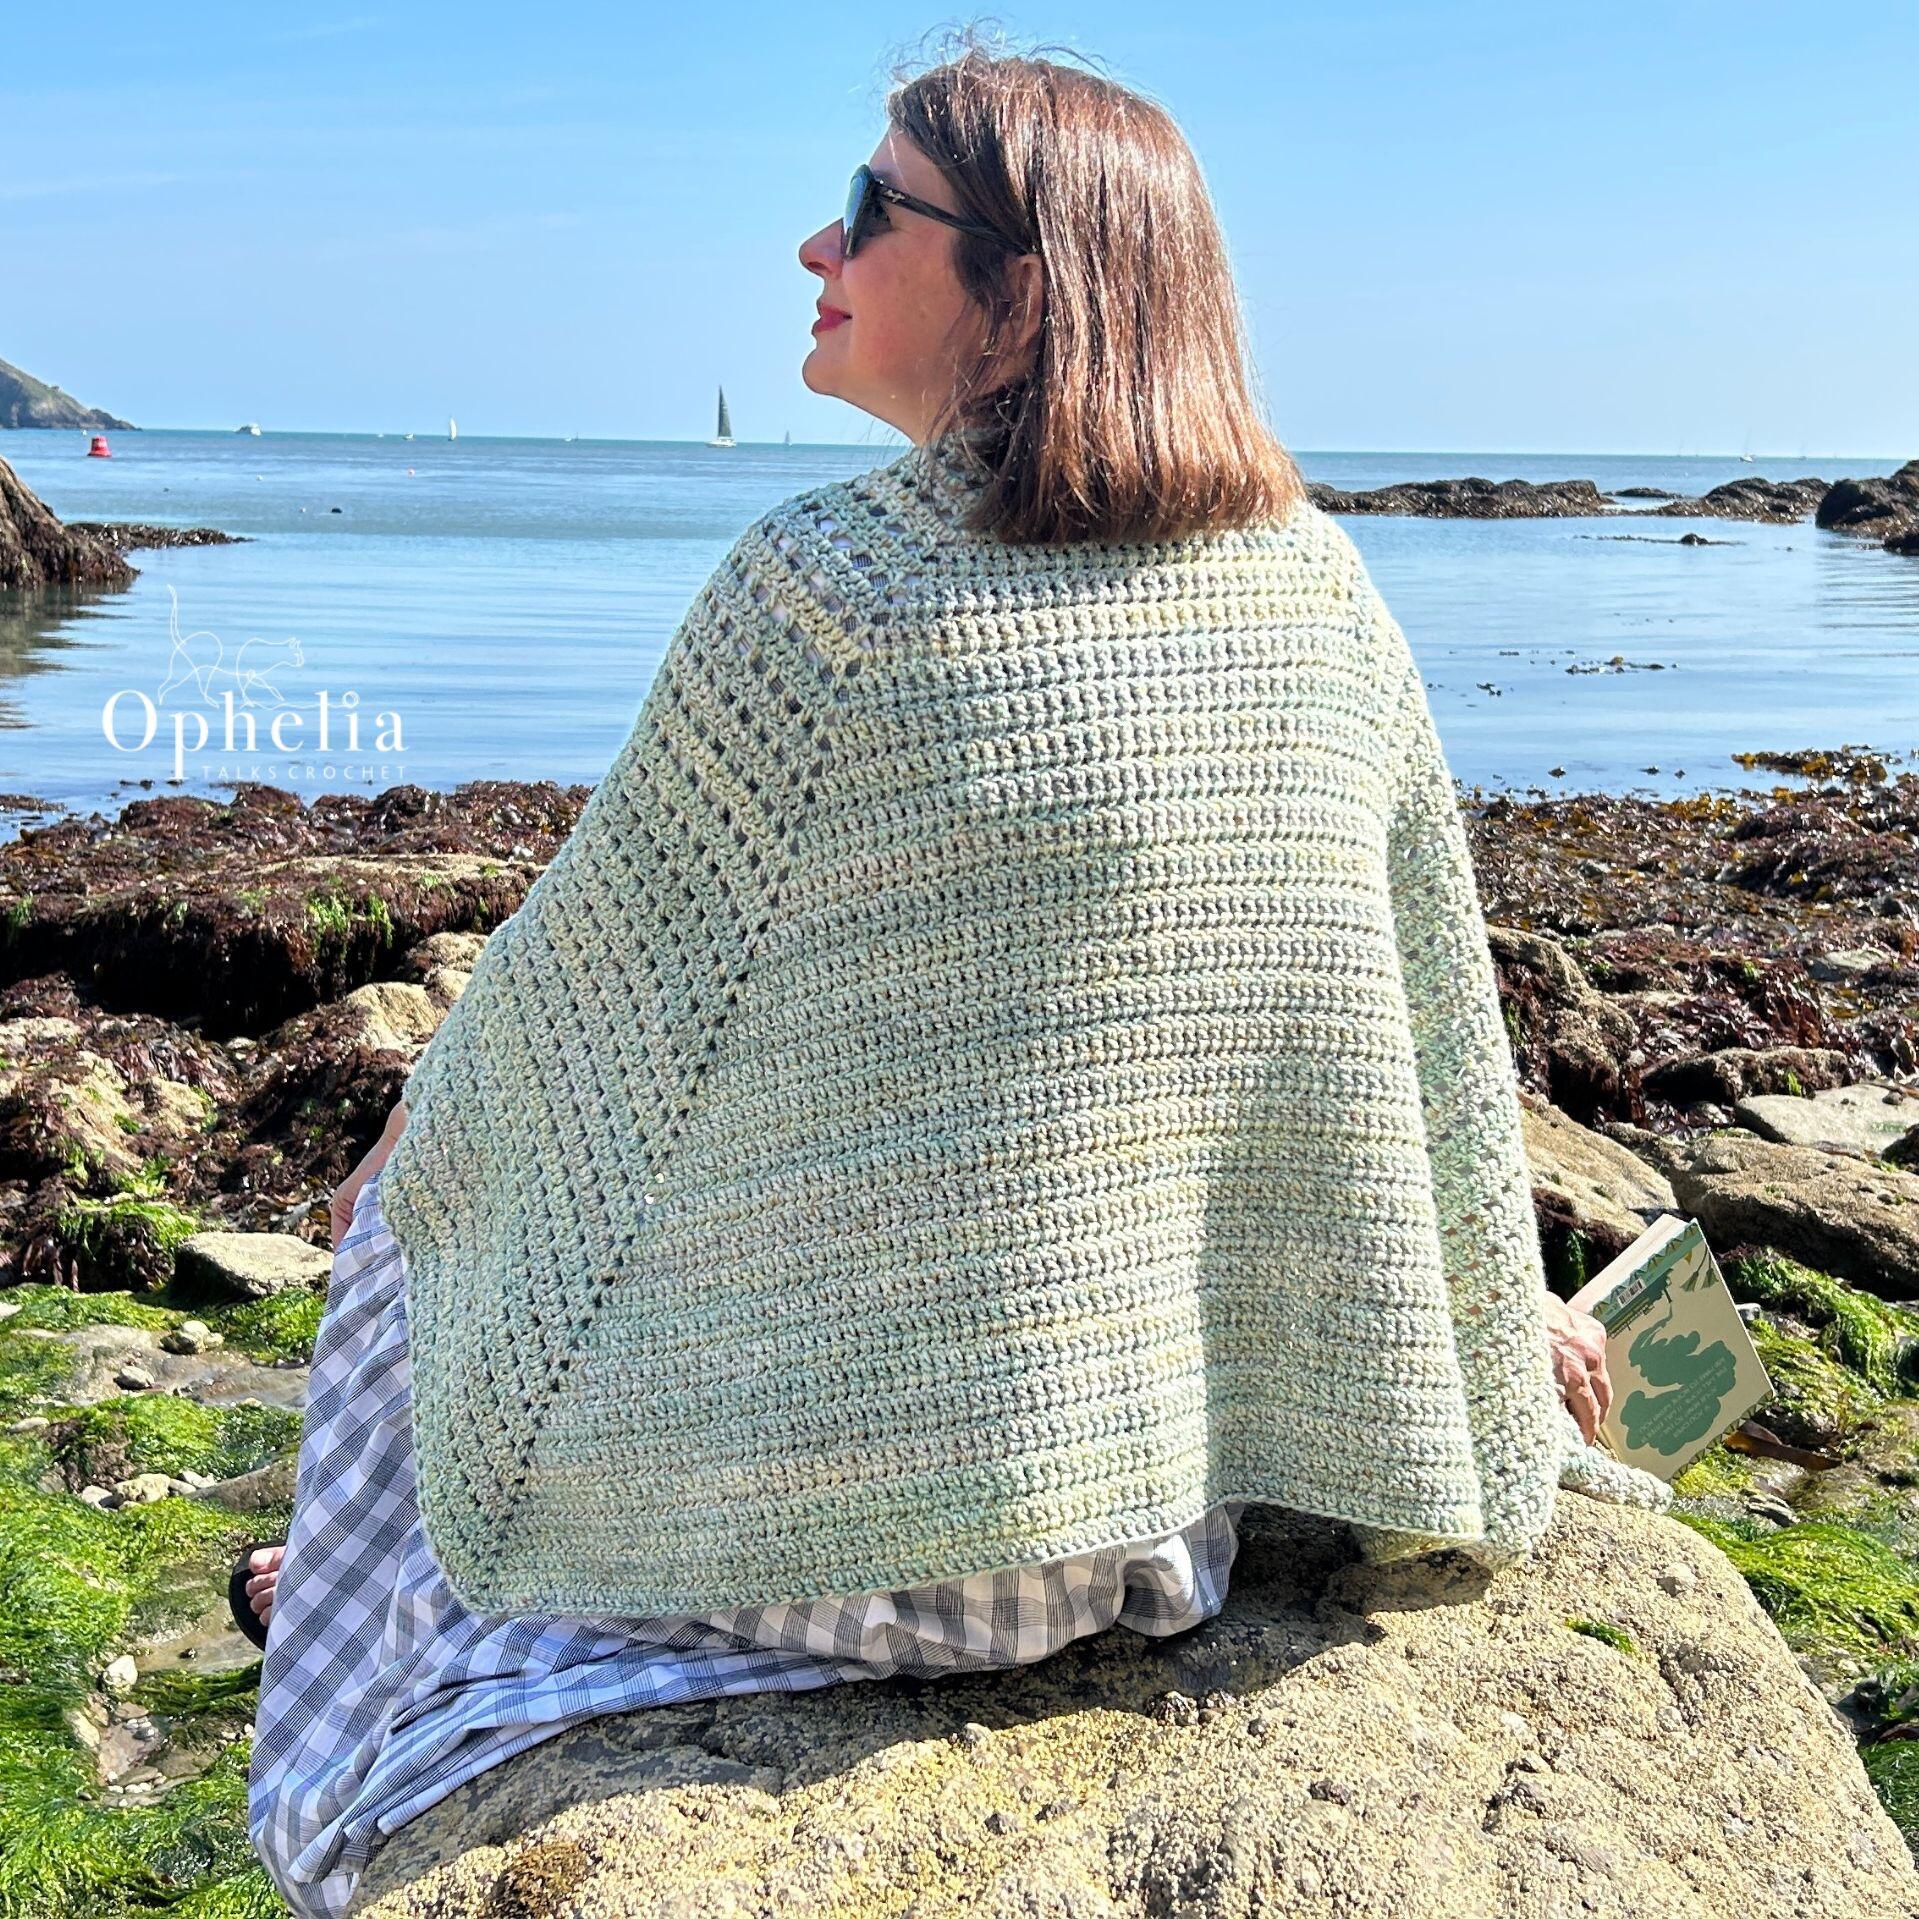 The reading shawl by Ophelia Talks Crochet at the seafront